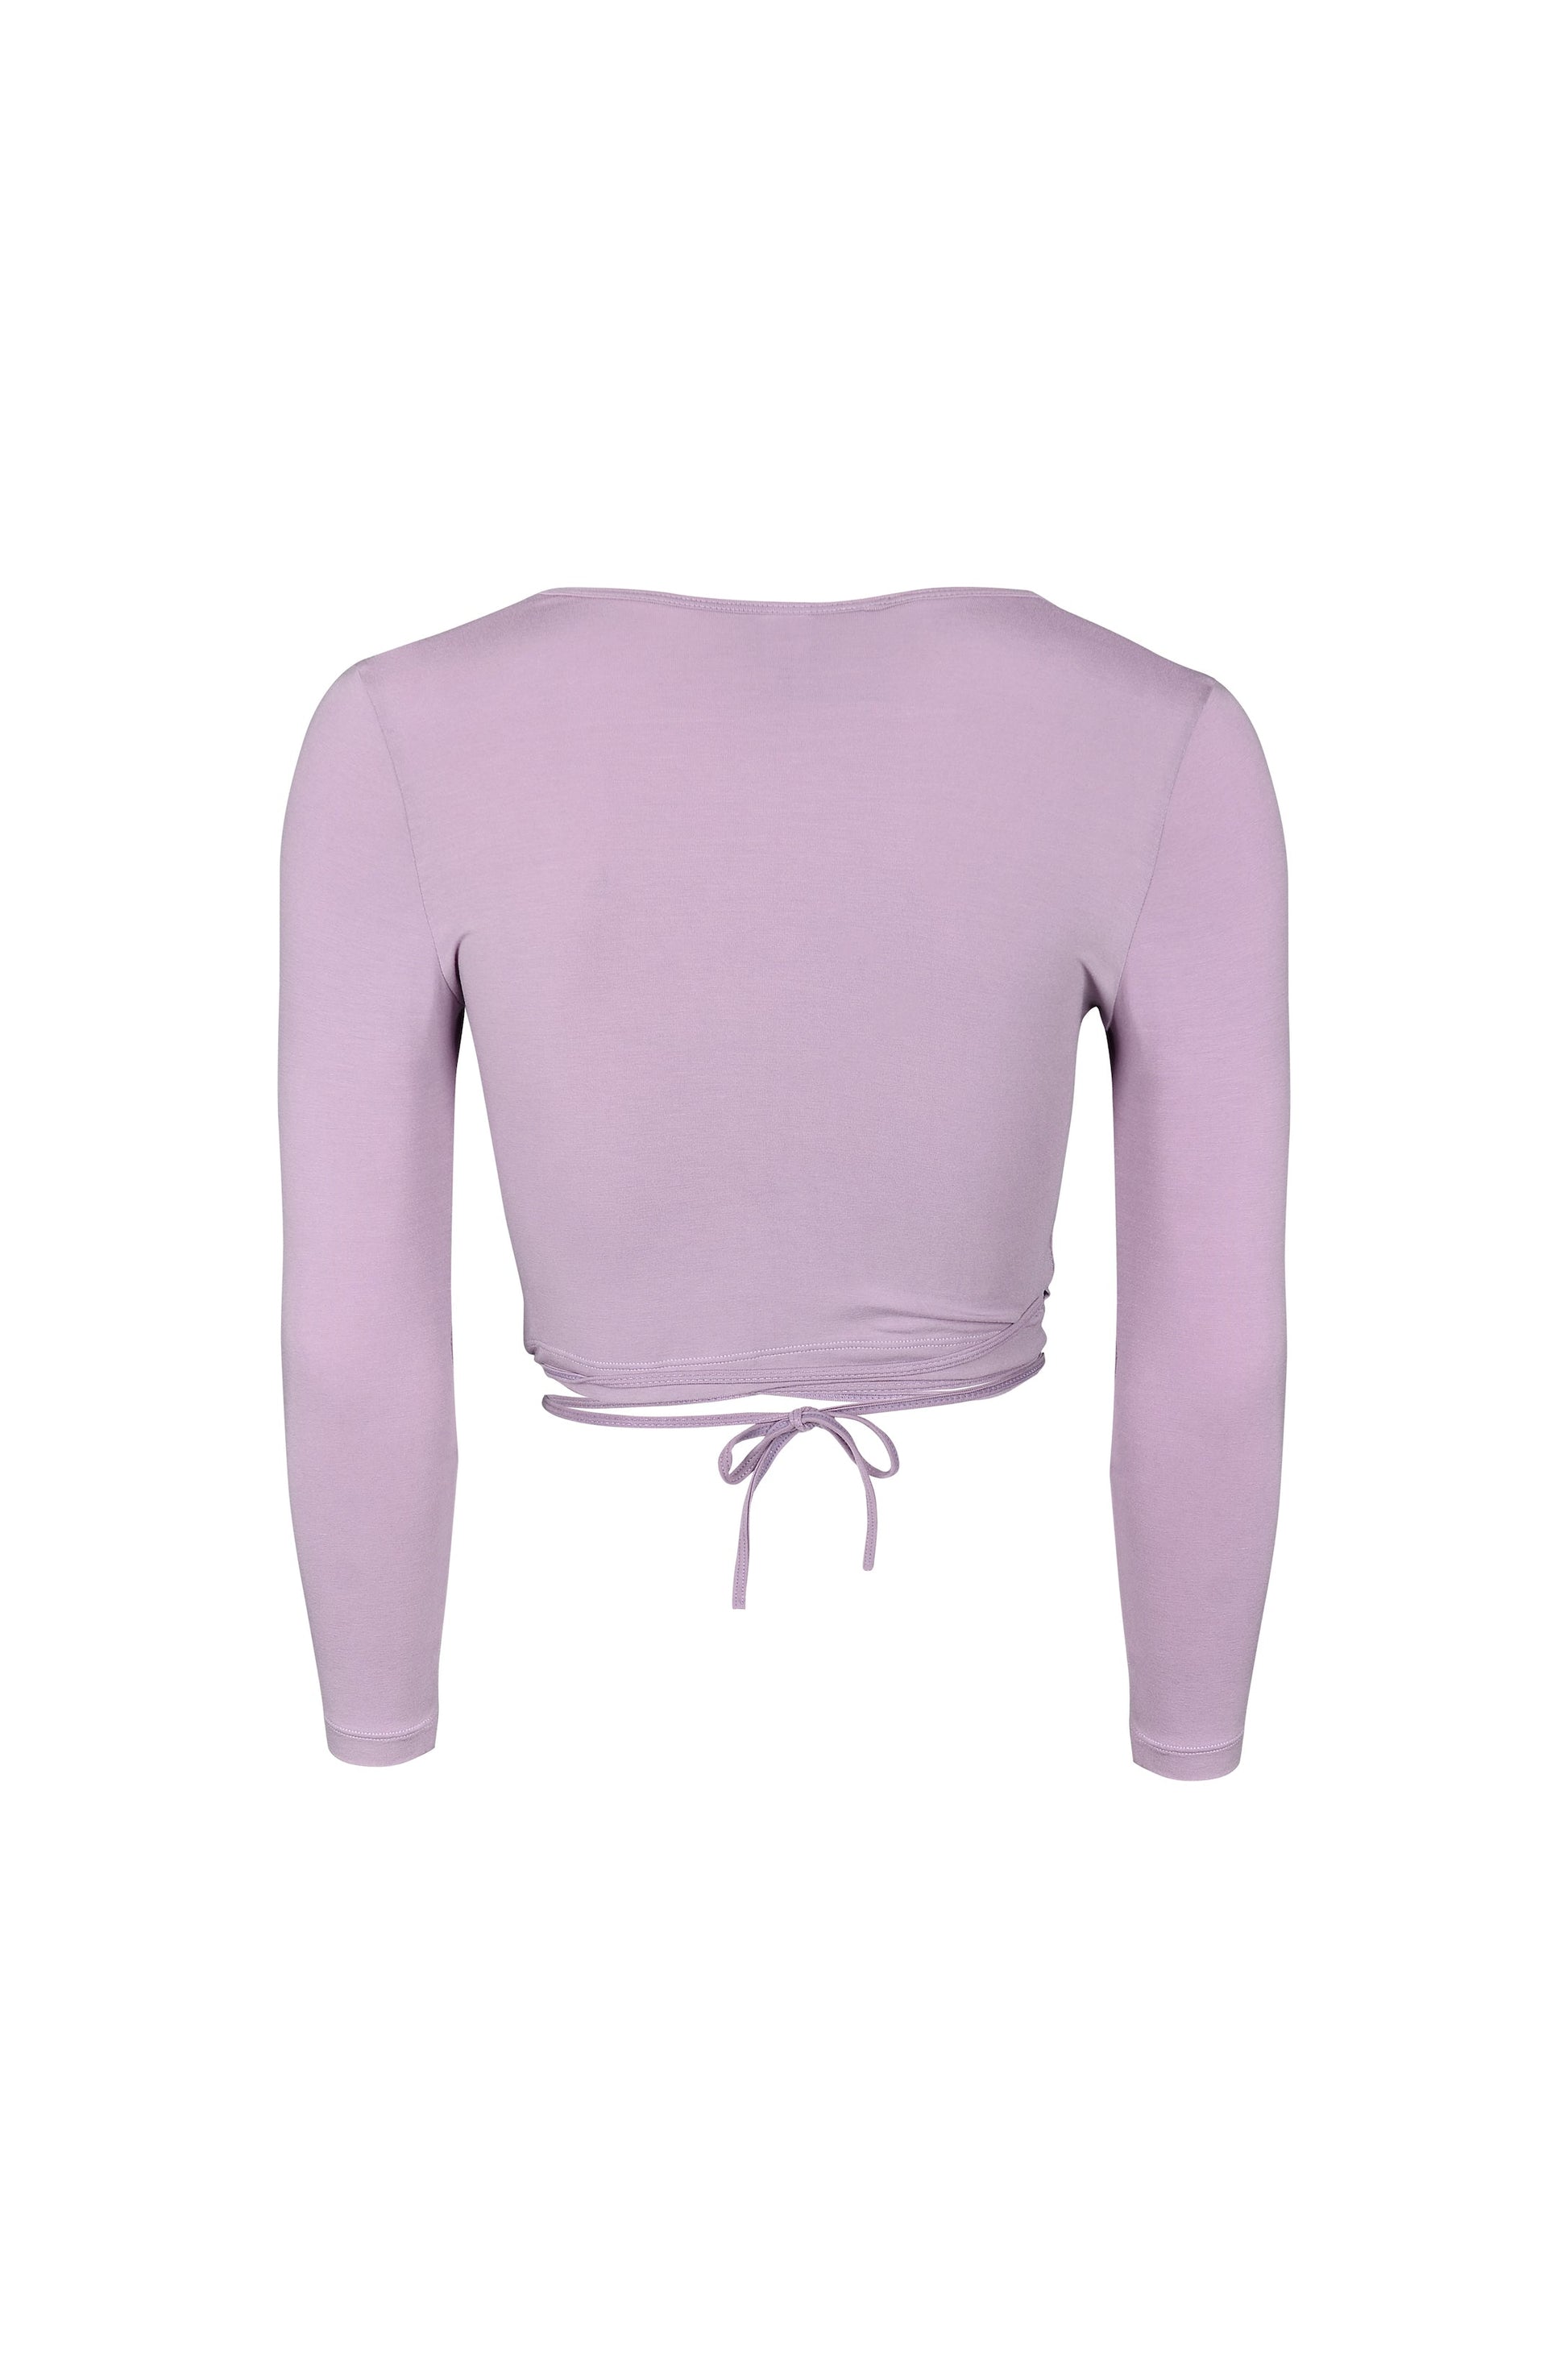 Sia Wrap Top (Lilac) - APPAREL THIS IS A LOVE SONG